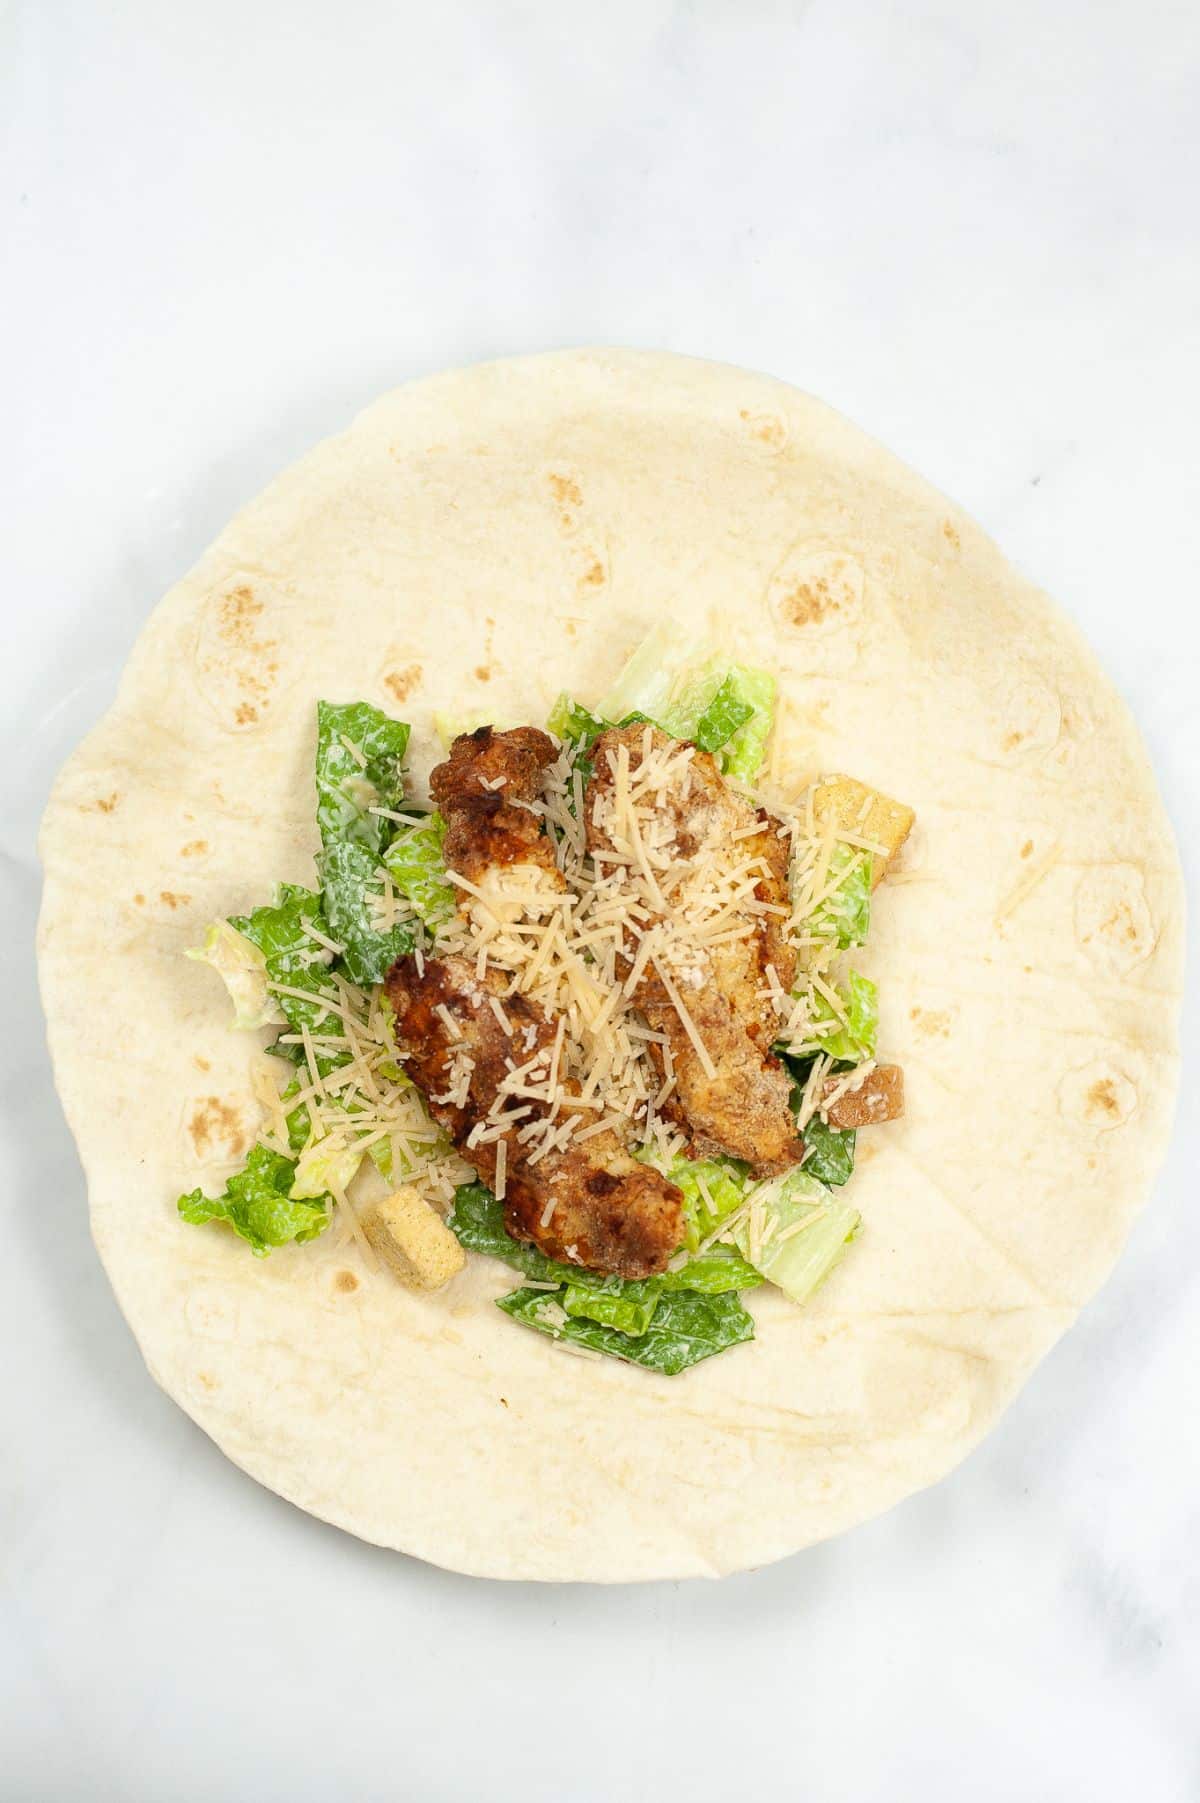 Tortilla with salad mixture and chicken.